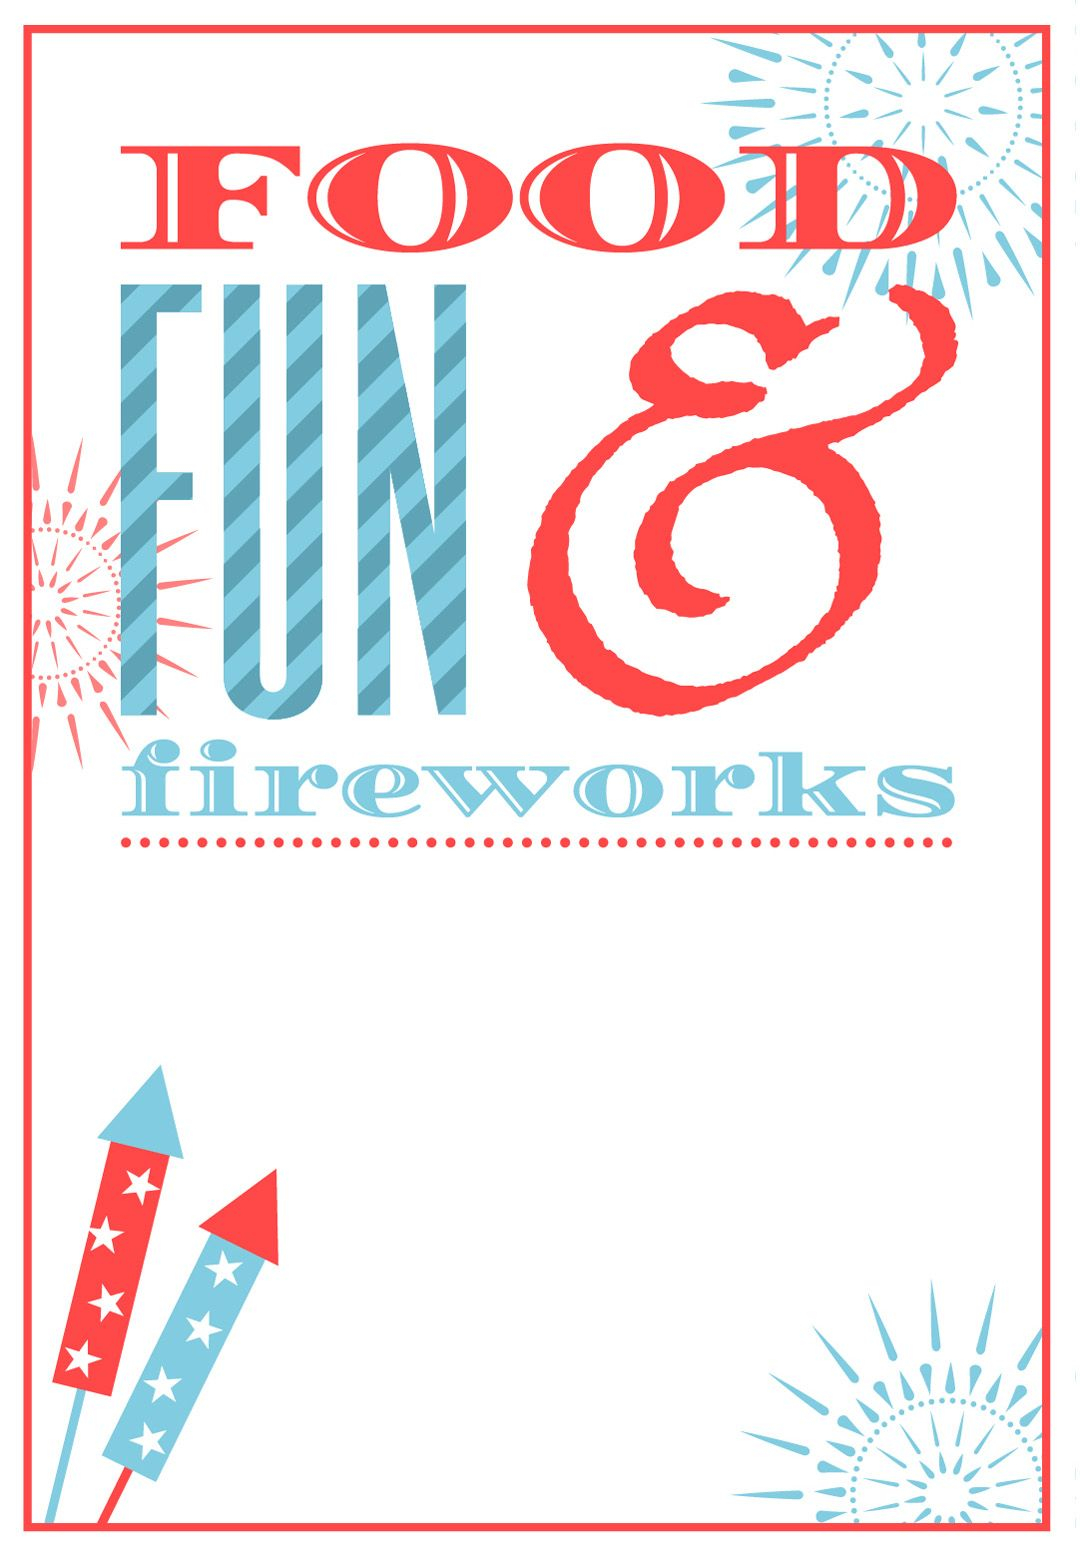 Free Printable 4th Of July Invitation July Fourth In 2019 First regarding dimensions 1080 X 1560